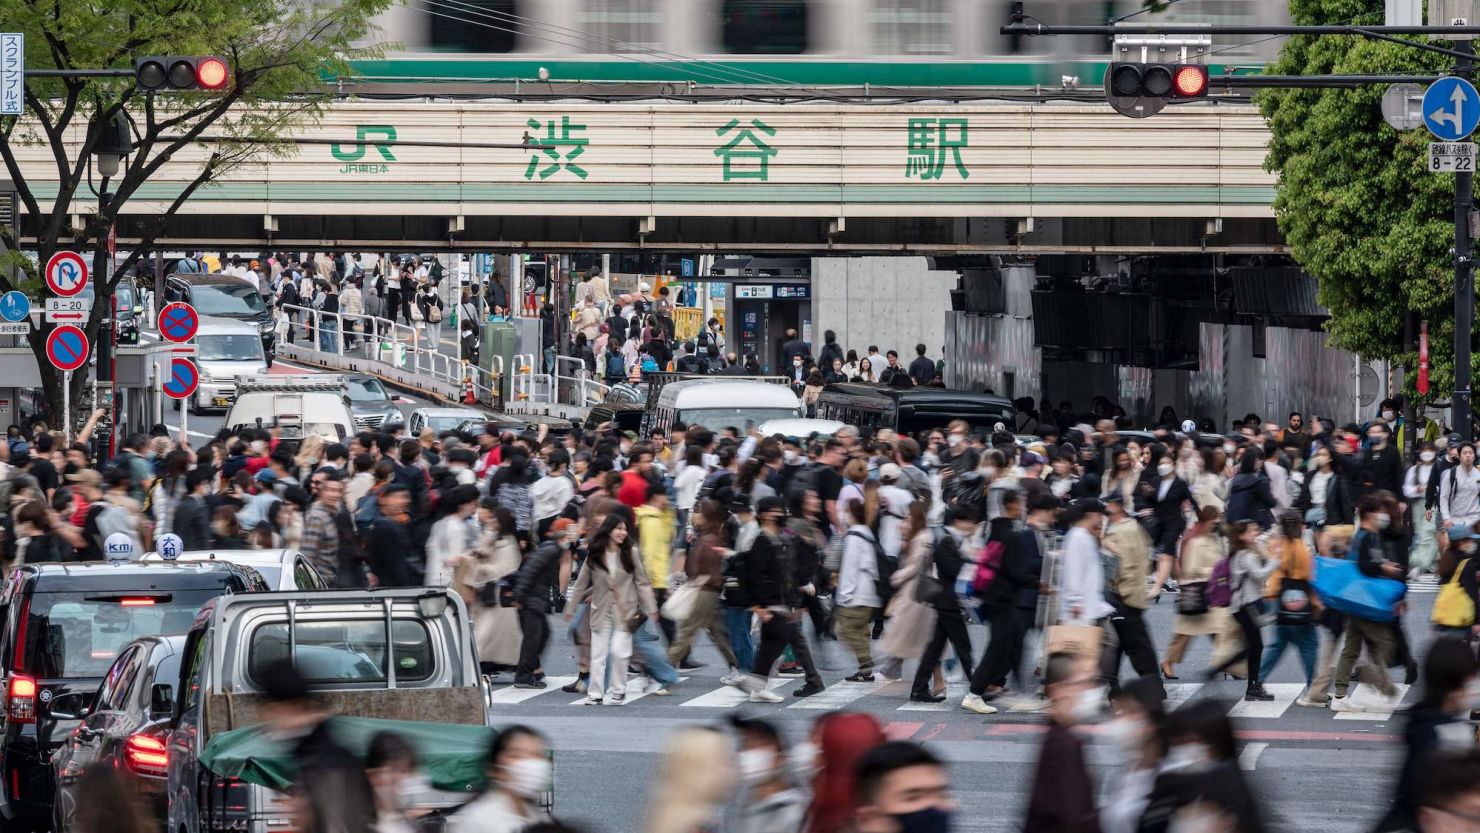 Crowds of people cross the street at Shibuya Crossing, one of the busiest intersections in the world, in the Shibuya district of Tokyo on April 5, 2023.